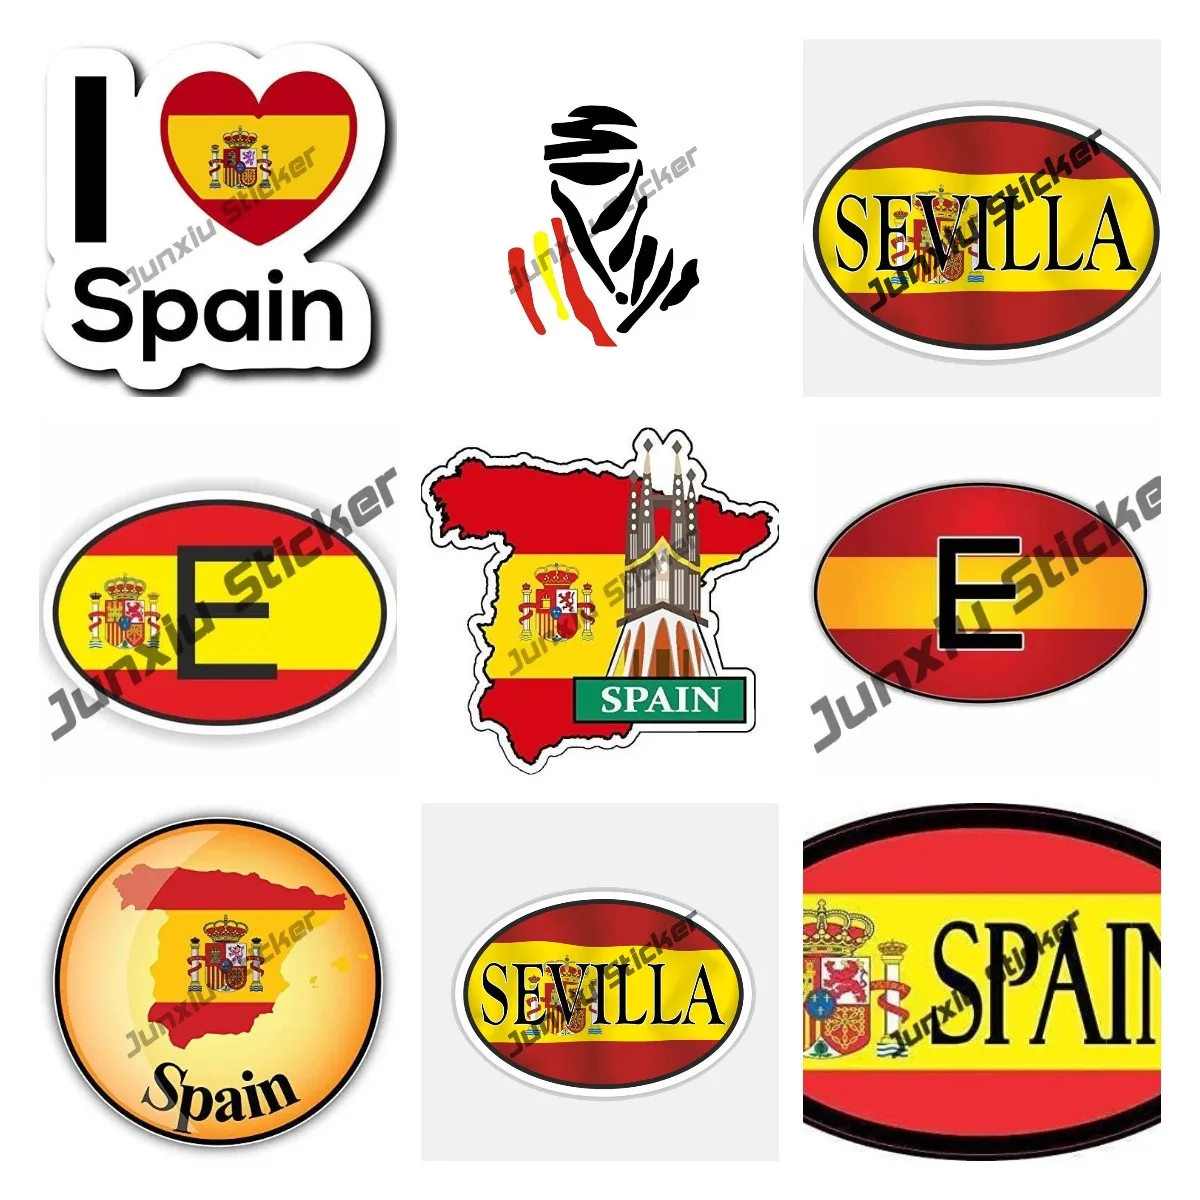 

Spanish Map with Flag Oval Inyl Sticker Spain Country Code E Spain Pride Patriotic Stickers Car Accessories Glue Sticker KK13cm